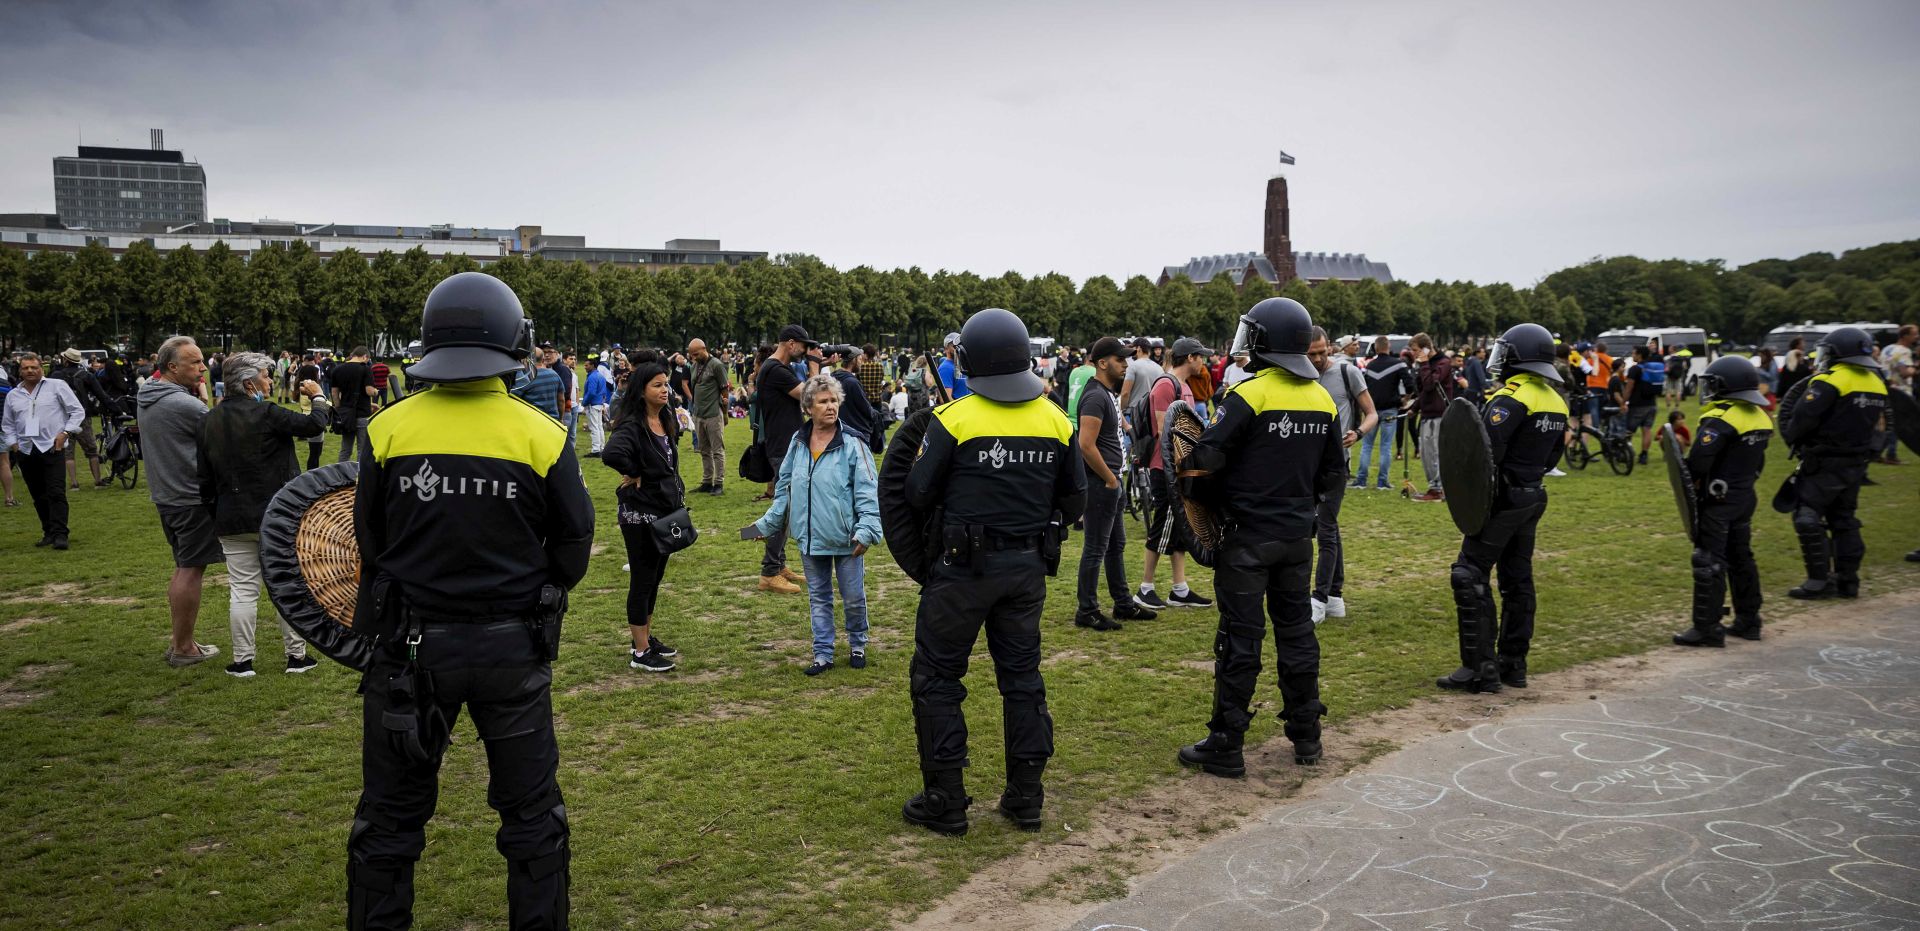 epa08500783 Police watch protesters in the center of The Hague, Netherlands, 21 June 2020. Demonstrators attended the protest on event venue Malieveld that focused on the coronavirus measures of the cabinet. The protest was initially banned due to an excessive number of interested people, but Mayor Remkes eventually allowed a short gathering.  EPA/ROBIN VAN LONKHUIJSEN